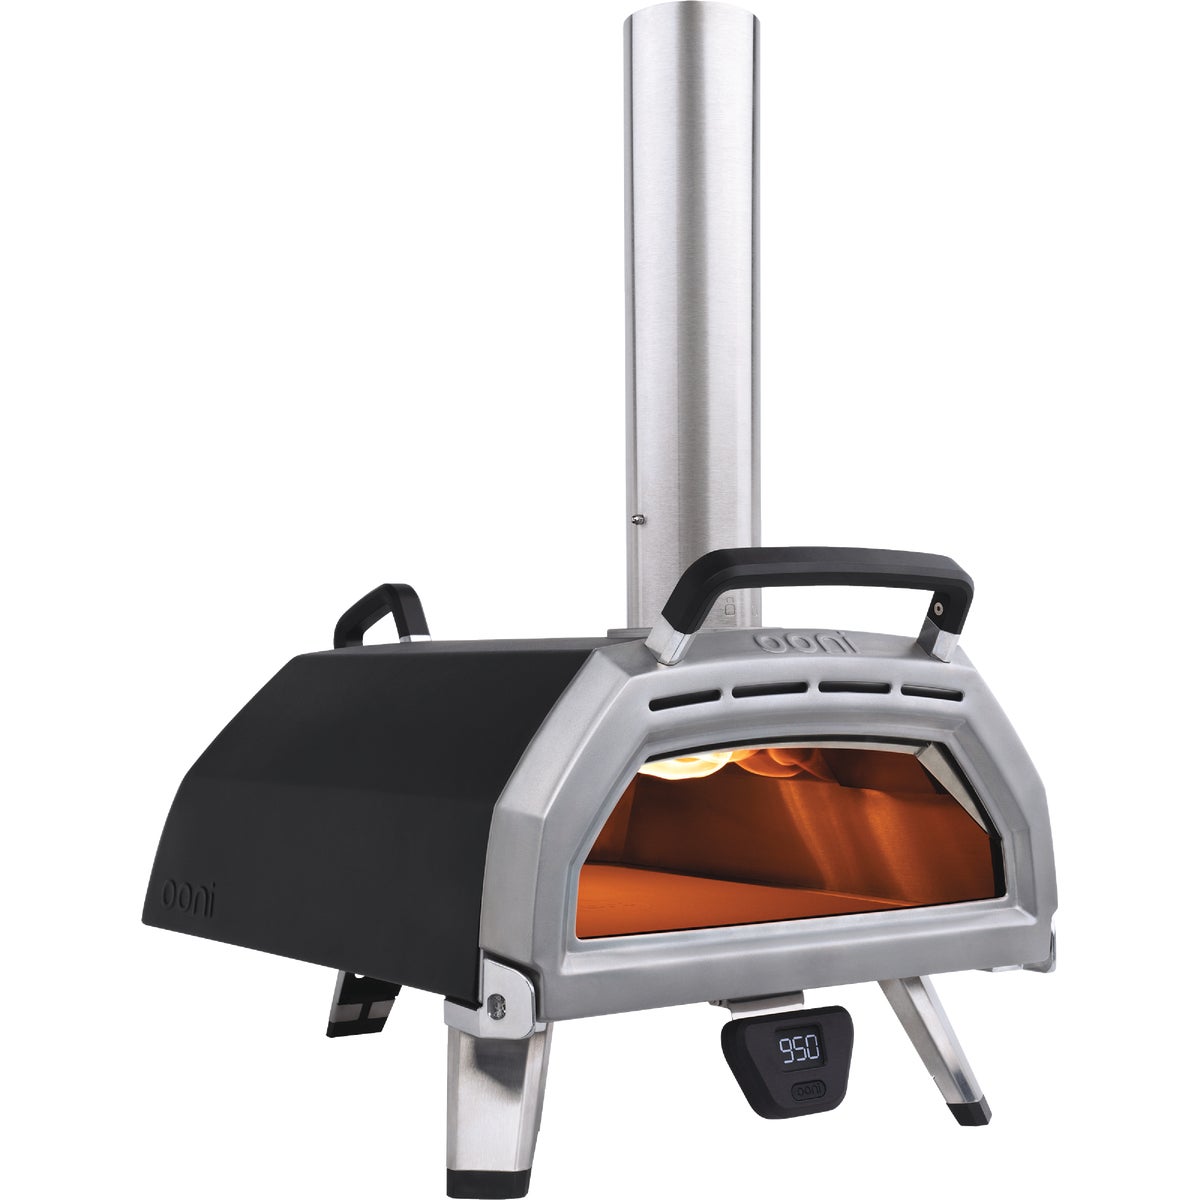 Outdoor Pizza Ovens & Accessories